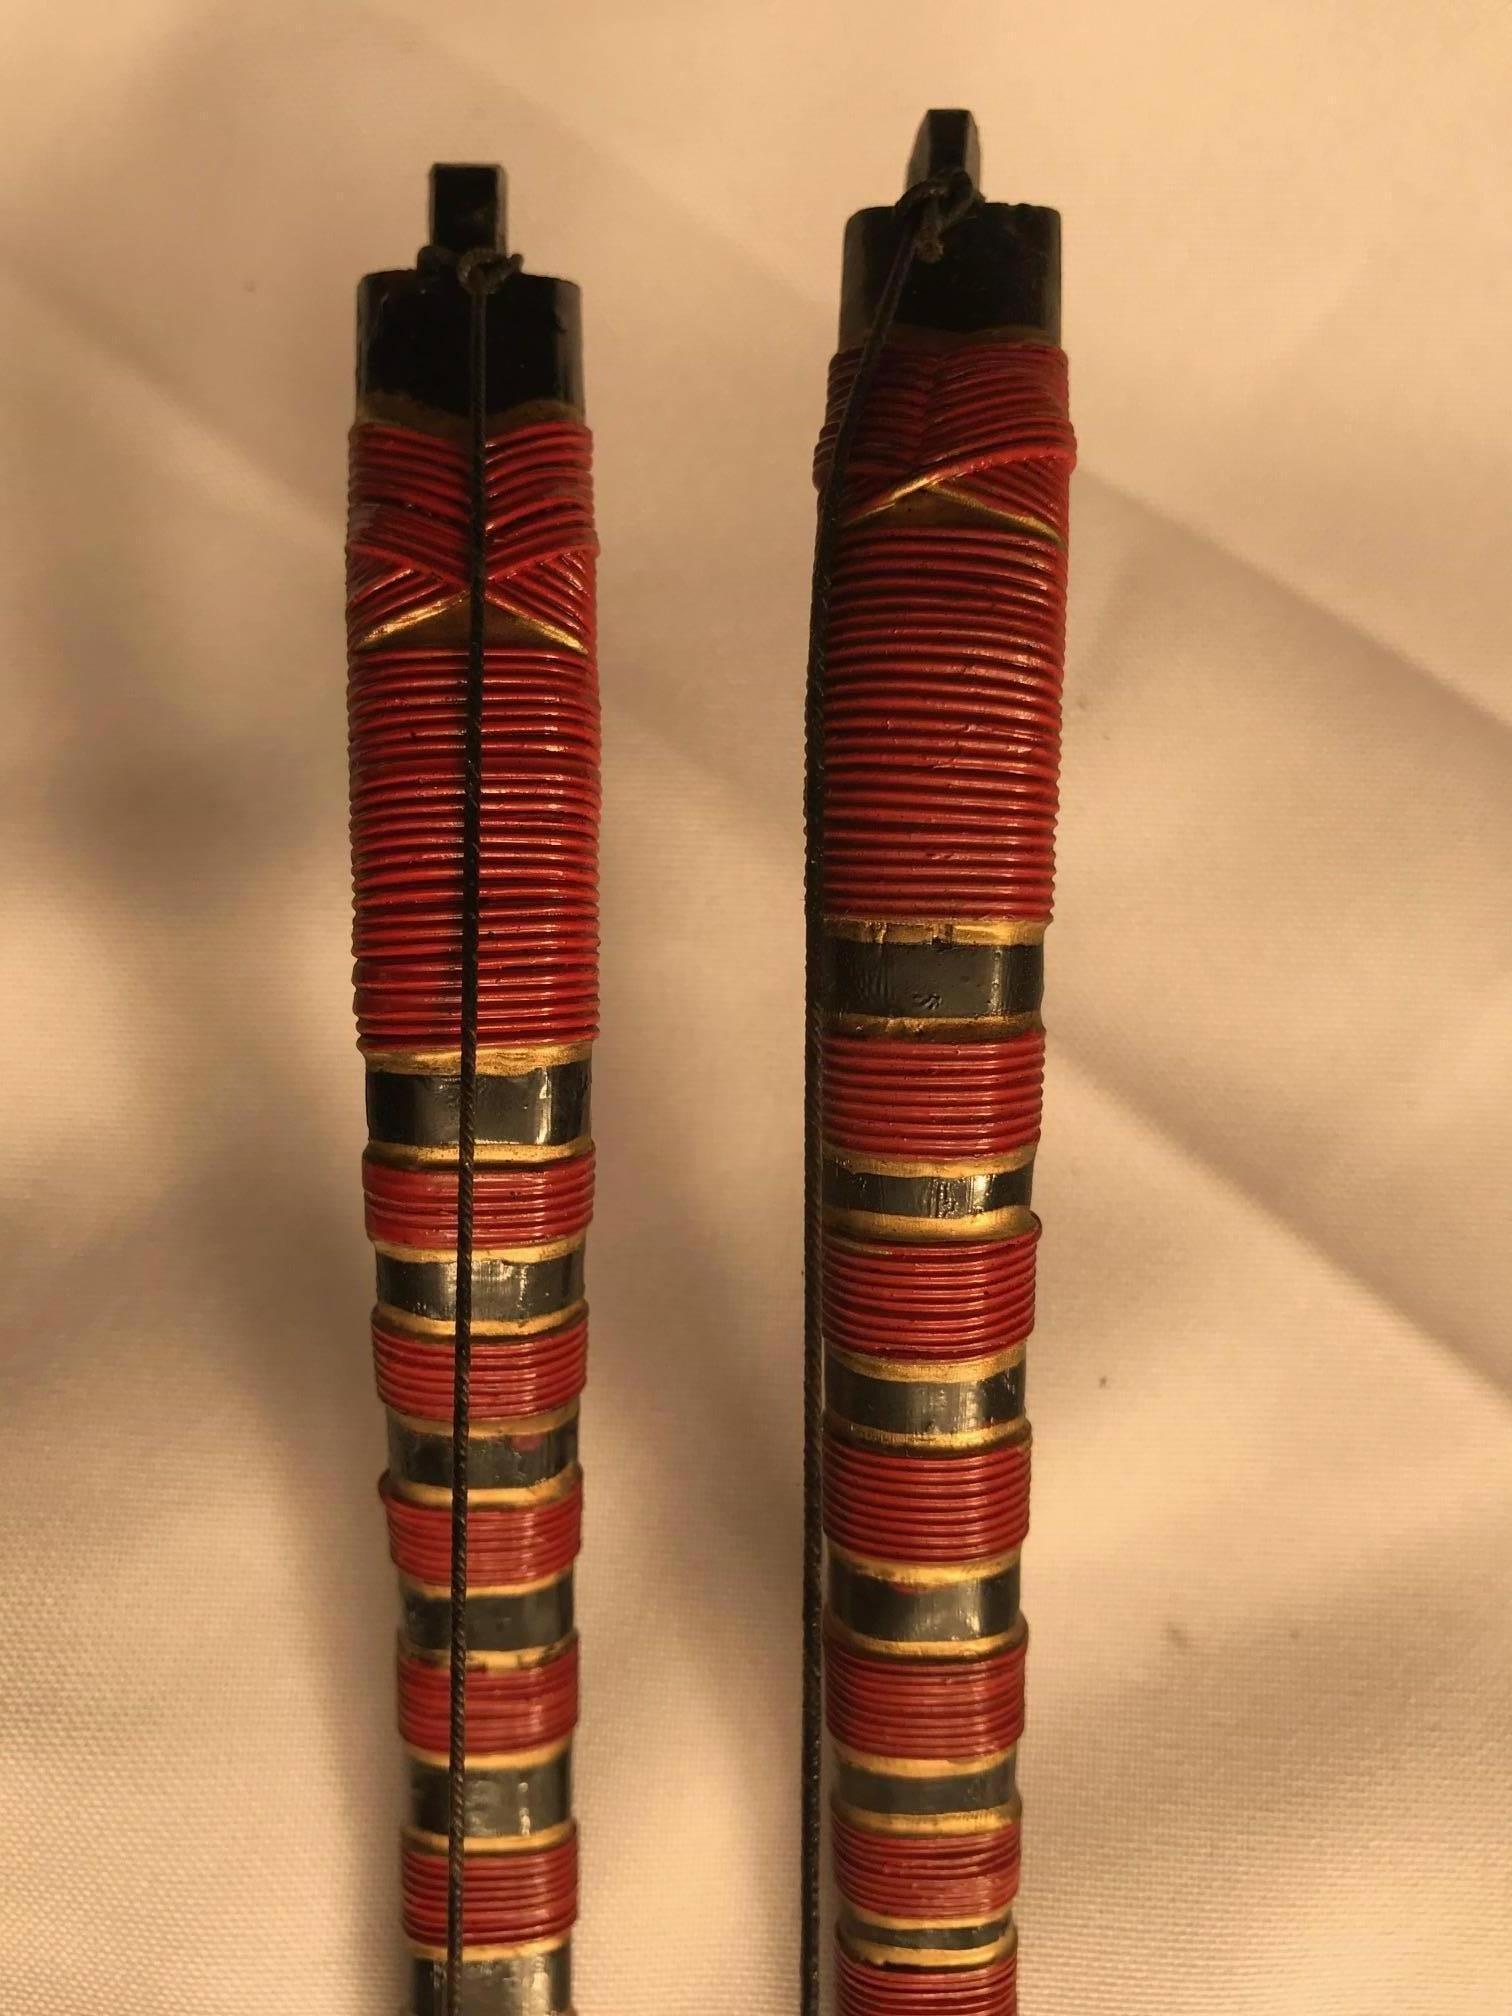 Japanese antique pair of Samurai bows with fine lacquered details in original vibrant red and black colors Meiji period, 19th century.

A rare find.

Quality: bamboo and vermilion lacquer (Japanese lacquer)
Patina and mild use appropriate to